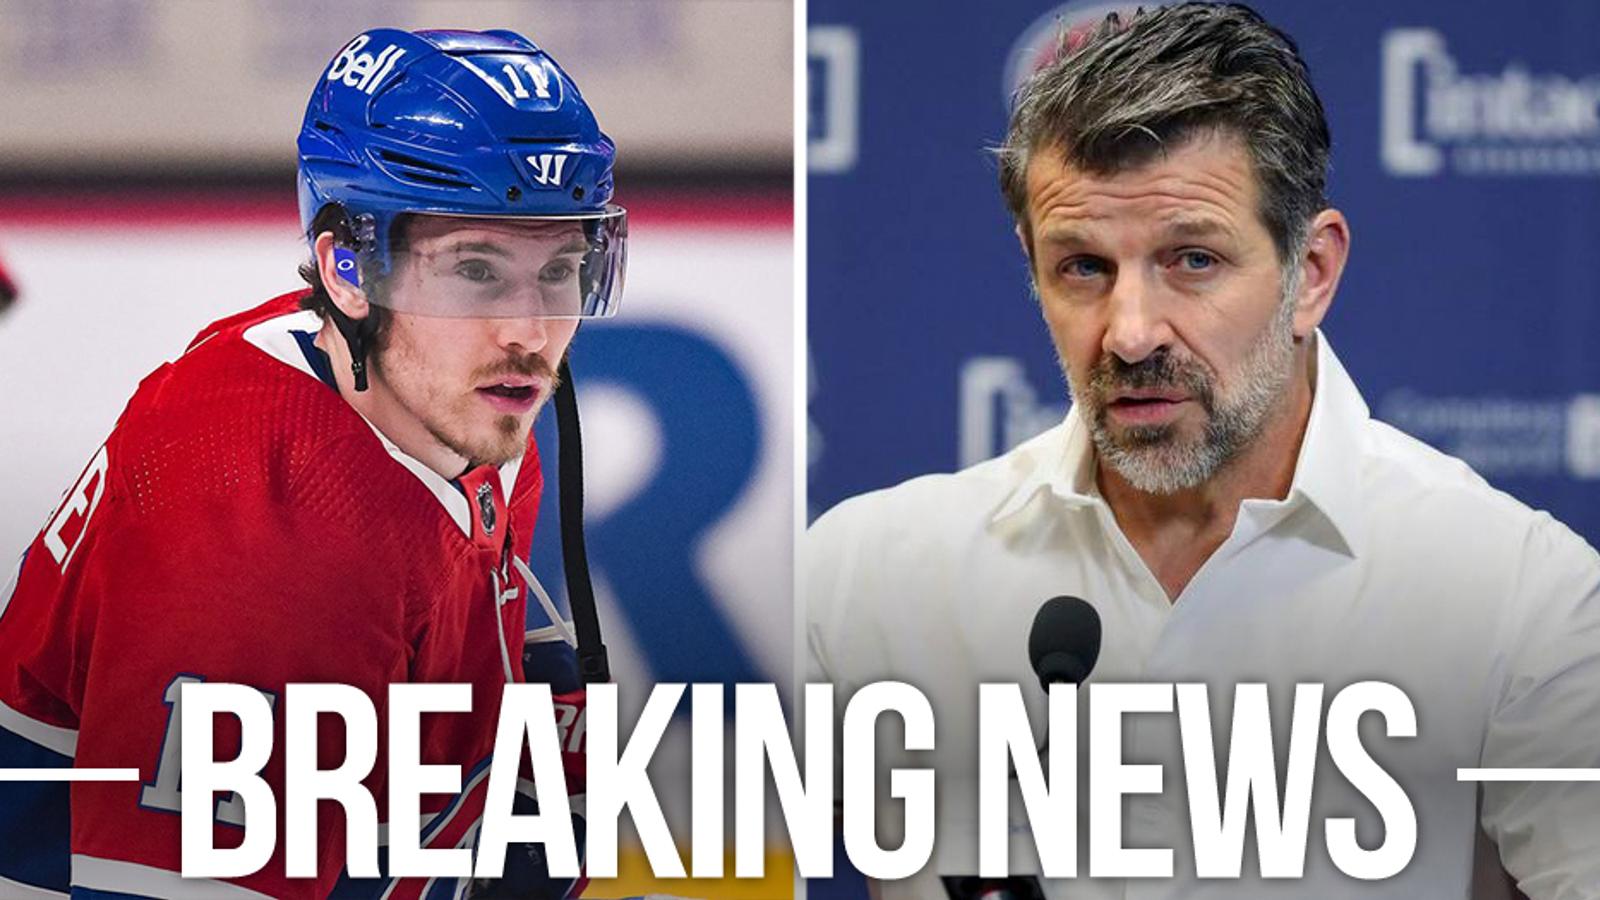 Habs place Gallagher on IR, free up nearly $4 million in cap space ahead of trade deadline